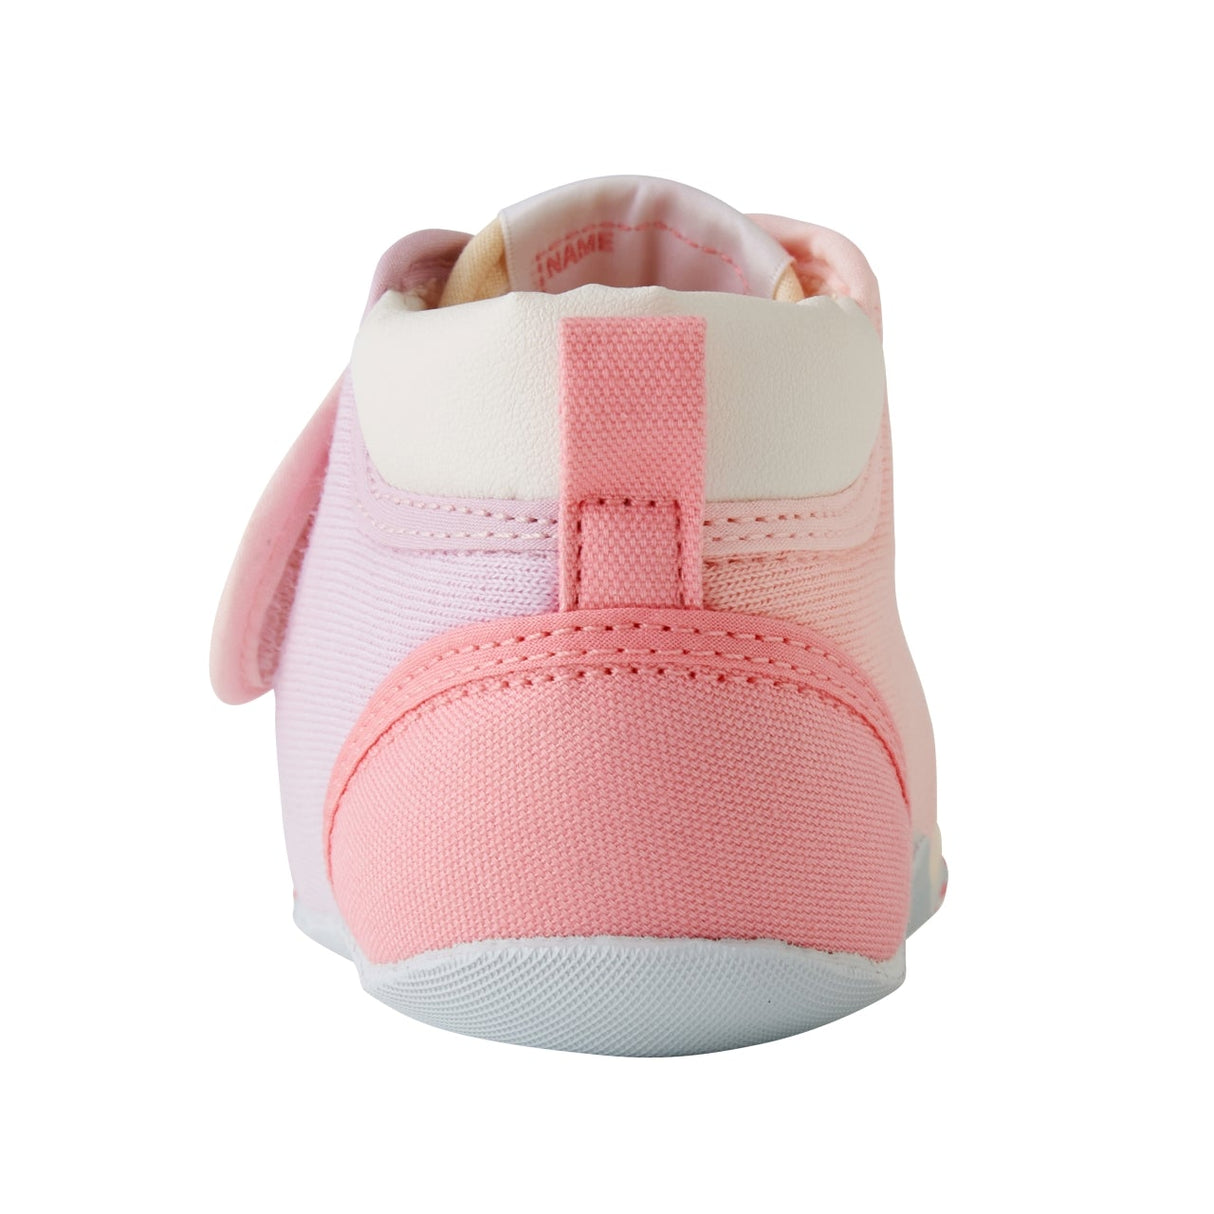 Japanese mikihouse toddler shoes, one section made in Japan 11-9301-577 (12-13.5cm)